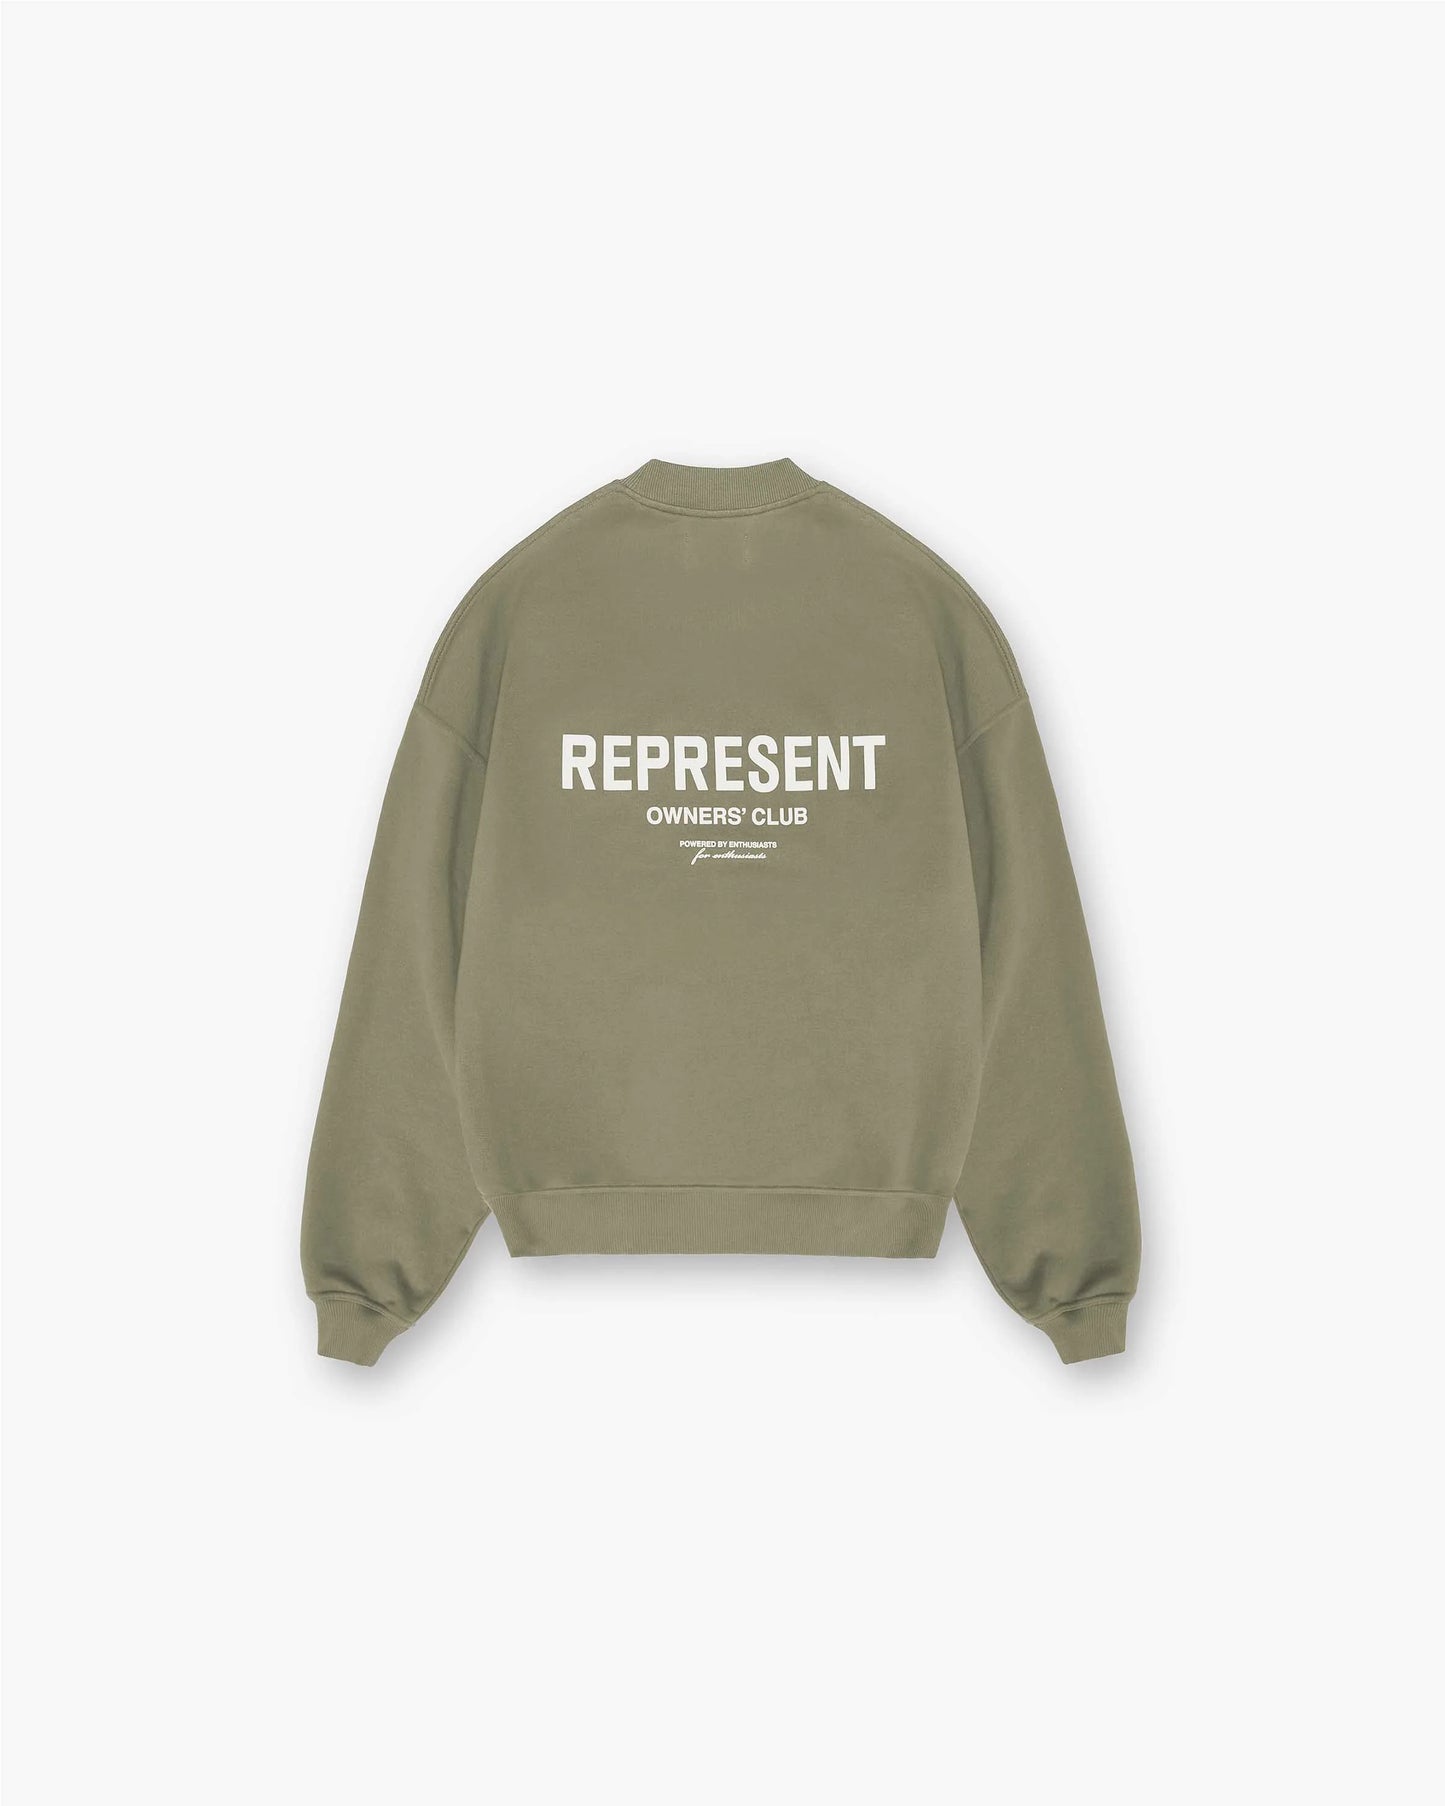 Represent OWNERS CLUB Logo Sweater